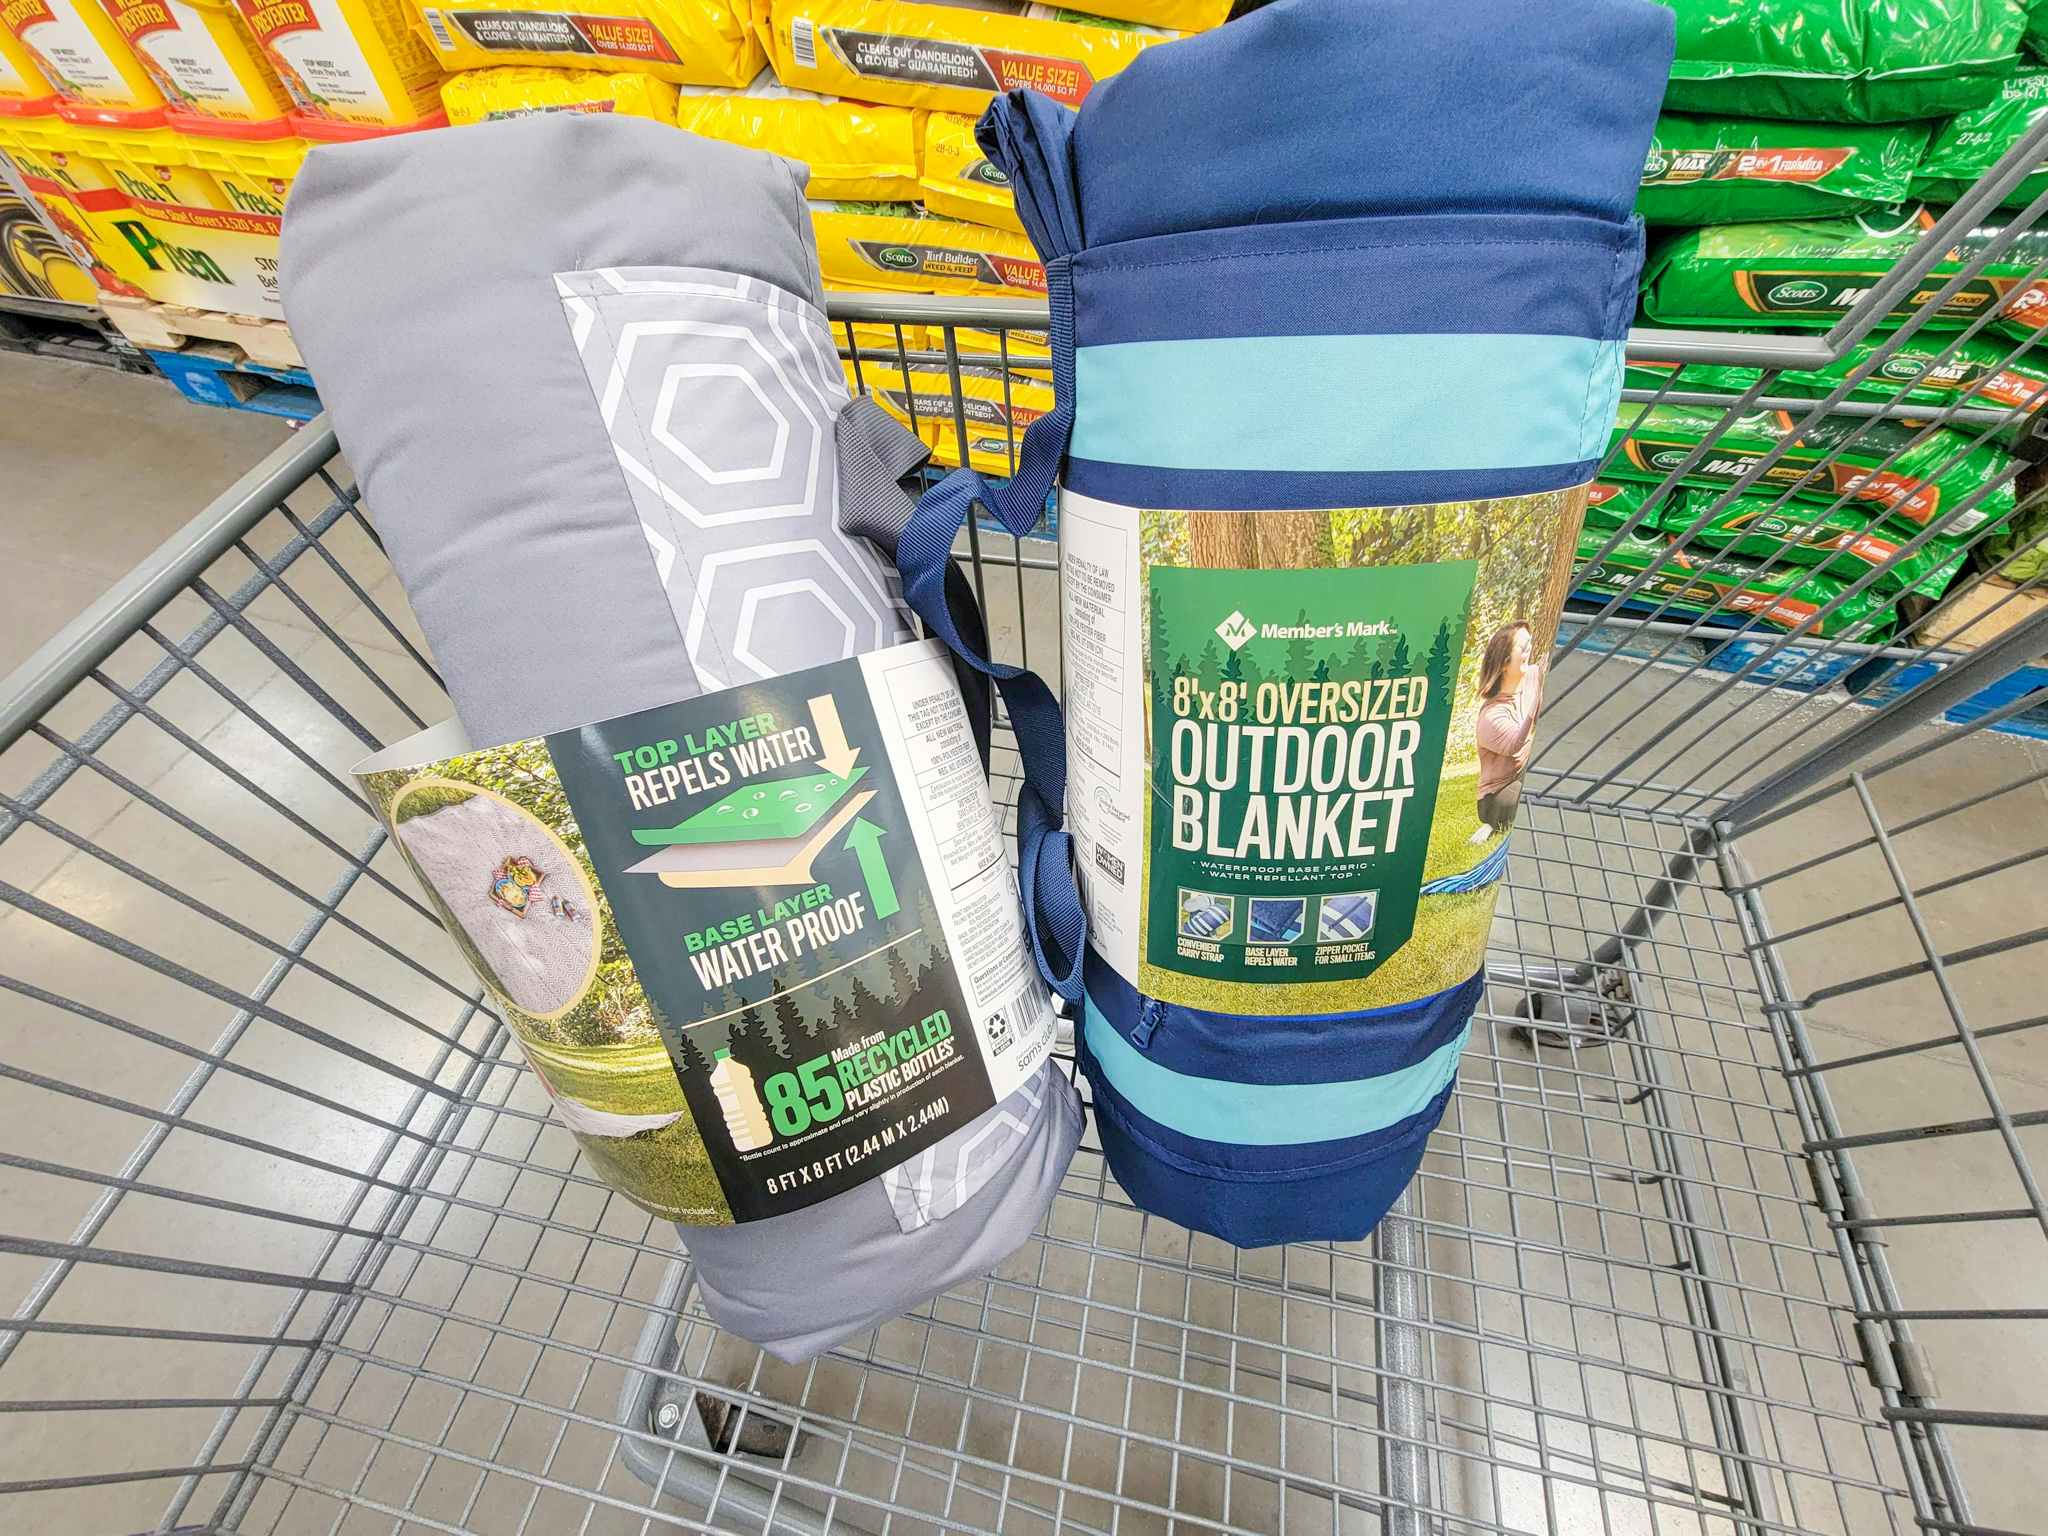 two outdoor blankets in a cart